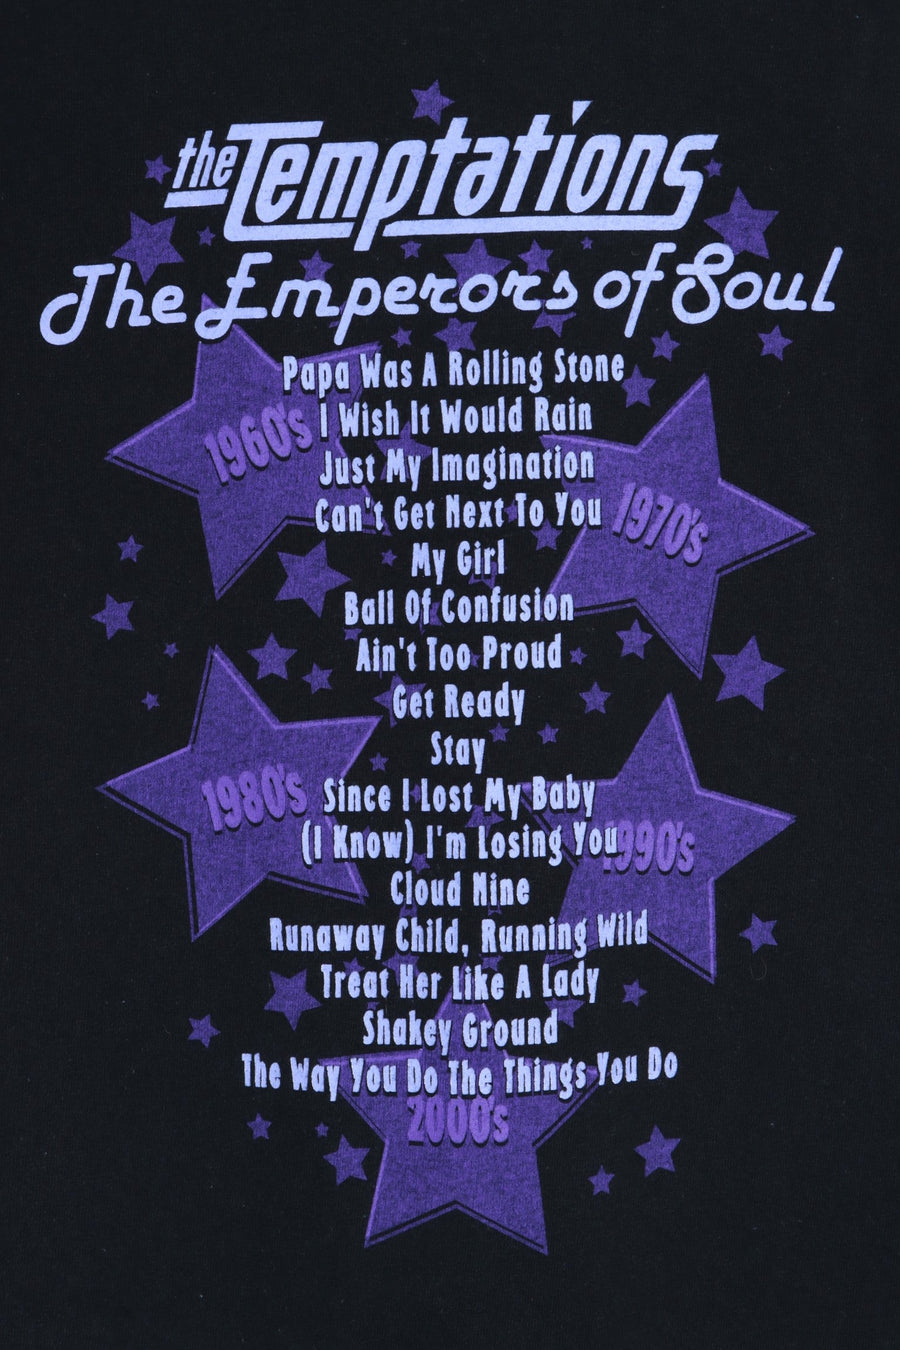 The Temptations "The Emperors of Soul" Motown Front Back Tee (L)